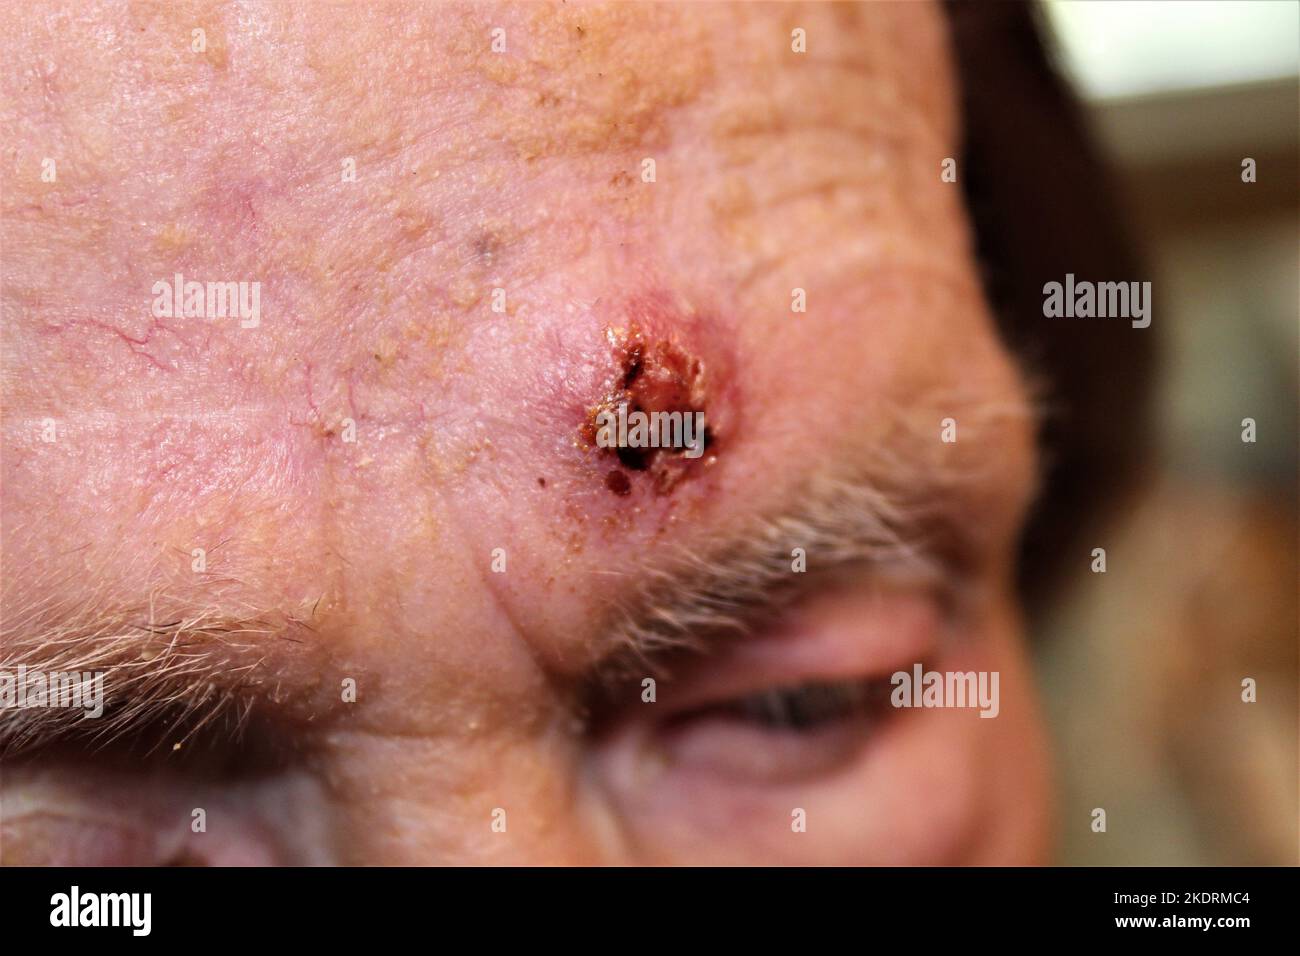 Squamous Cell Carcinoma on forehead of elderly woman Stock Photo